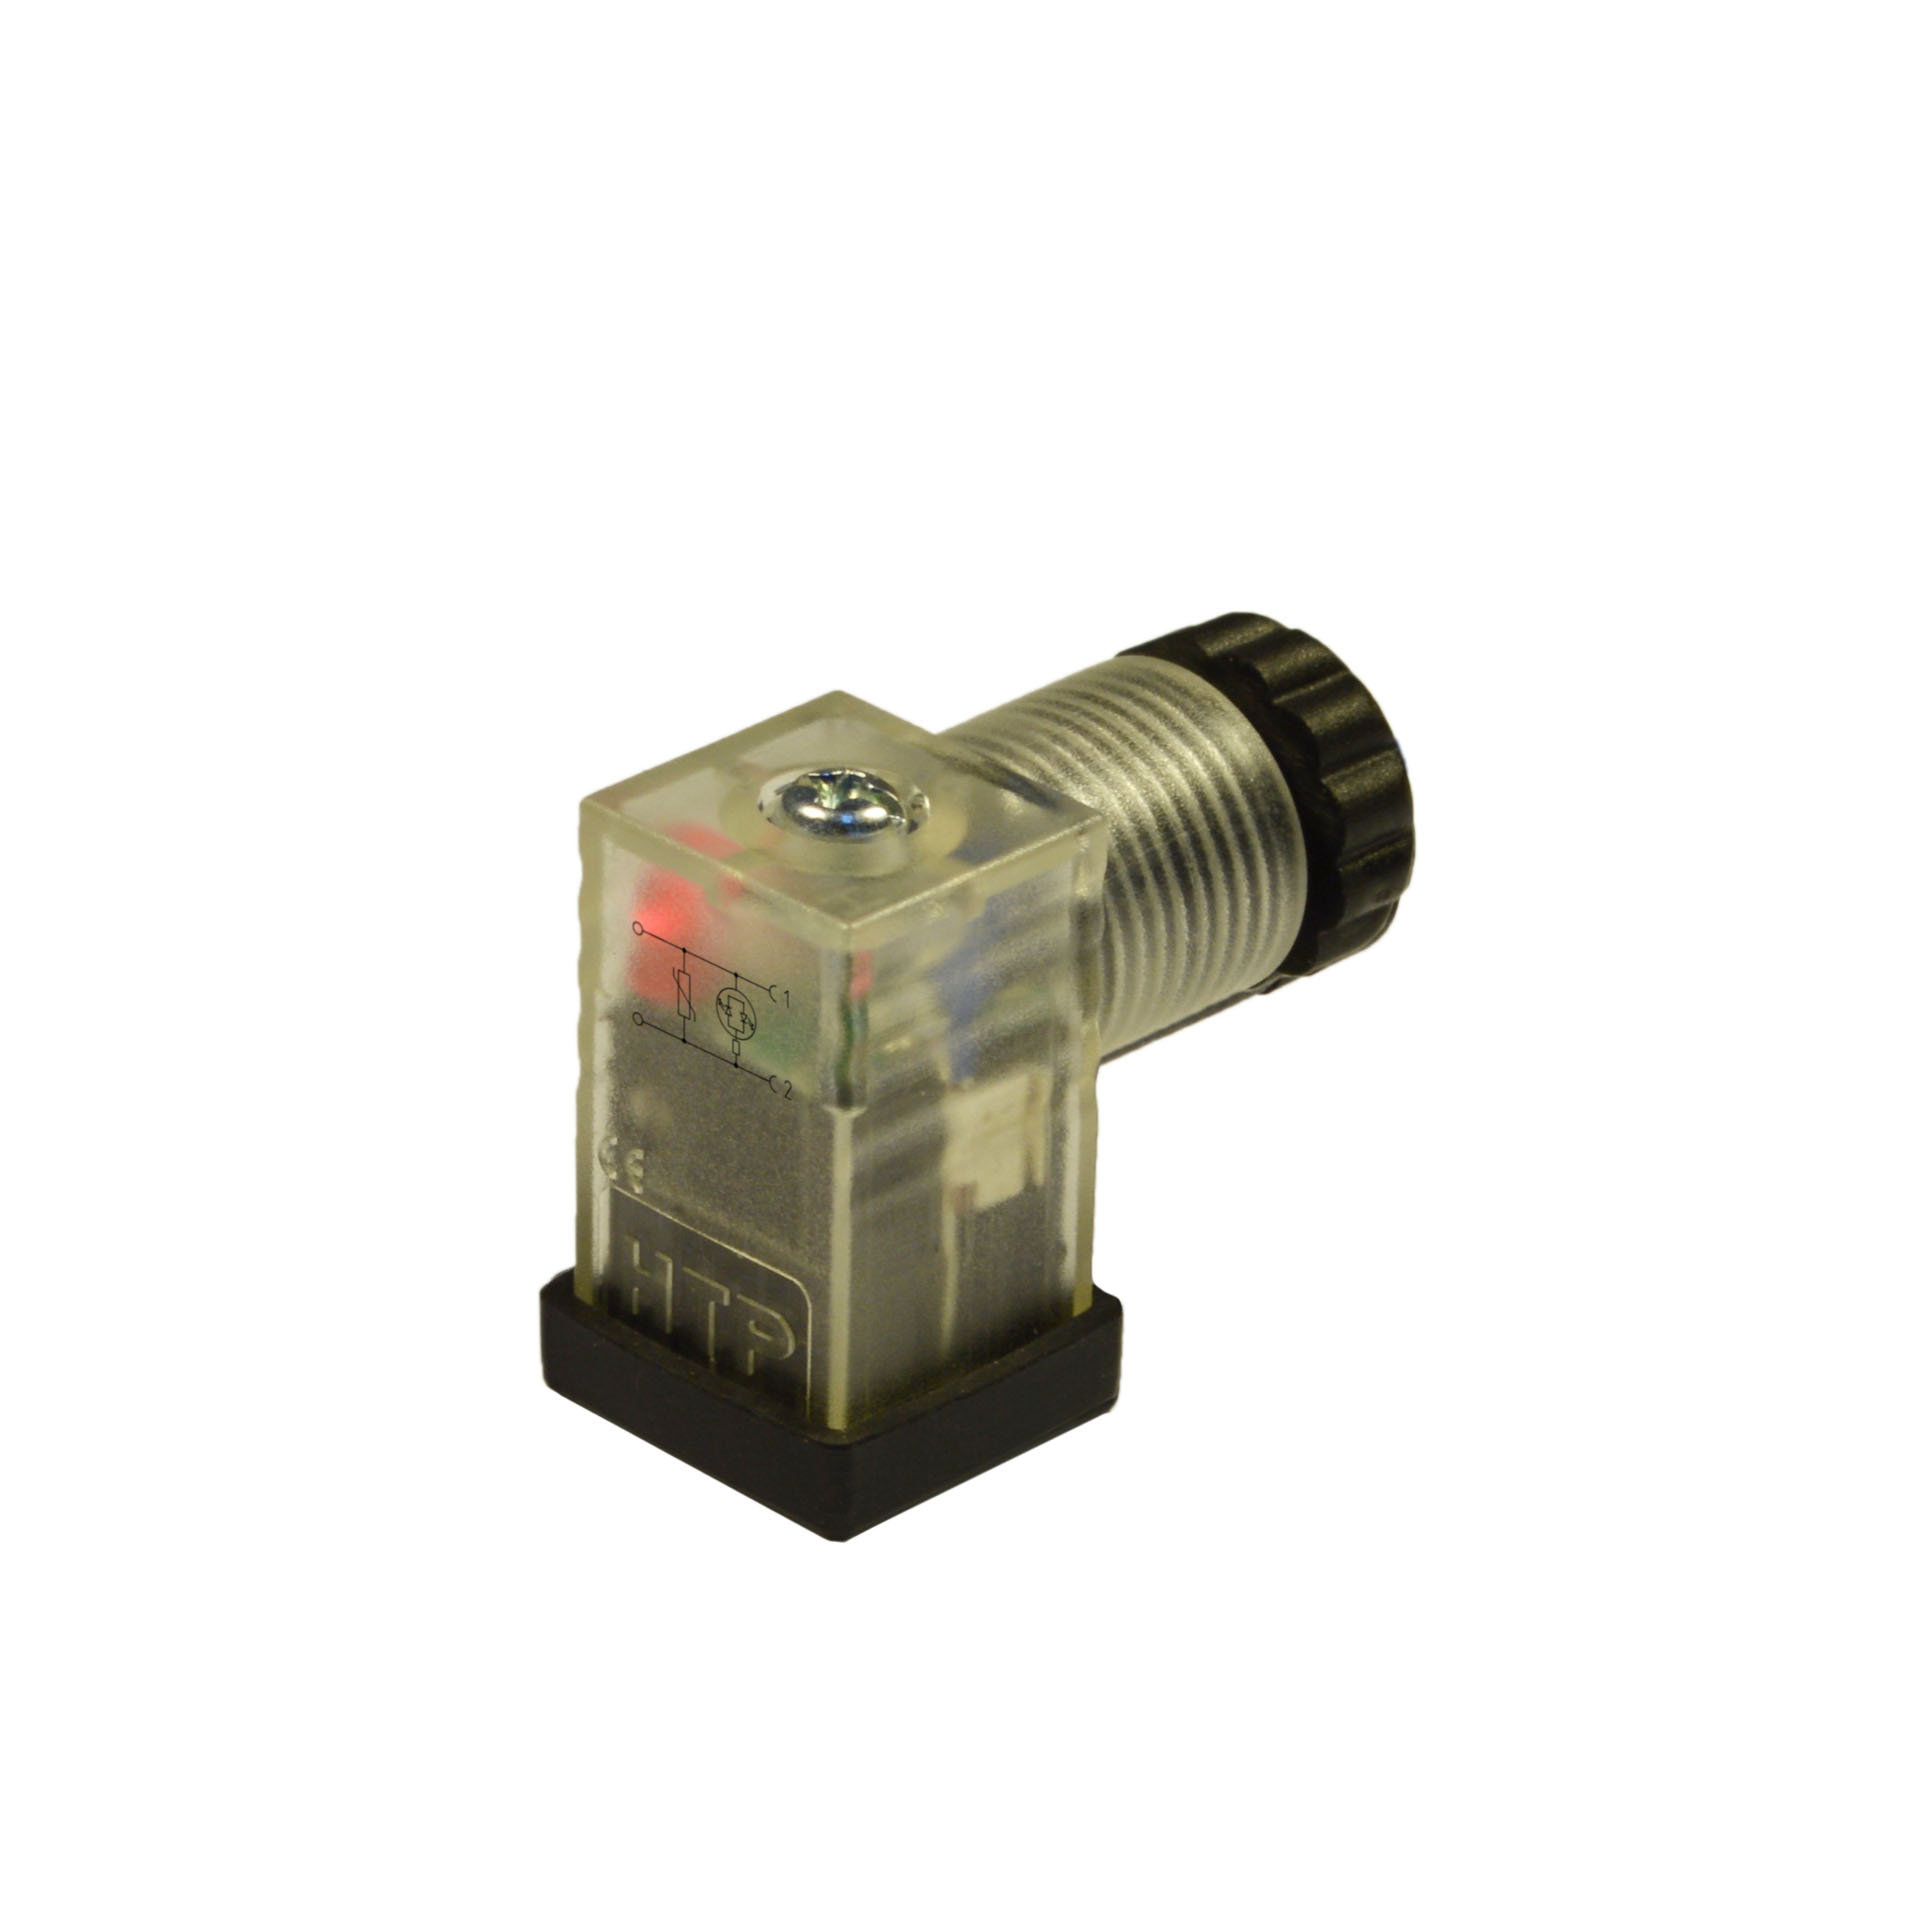 Industriale/C a cablare,2p+T(h.6),LED rosso+vdr,115VAC/DC,PG7